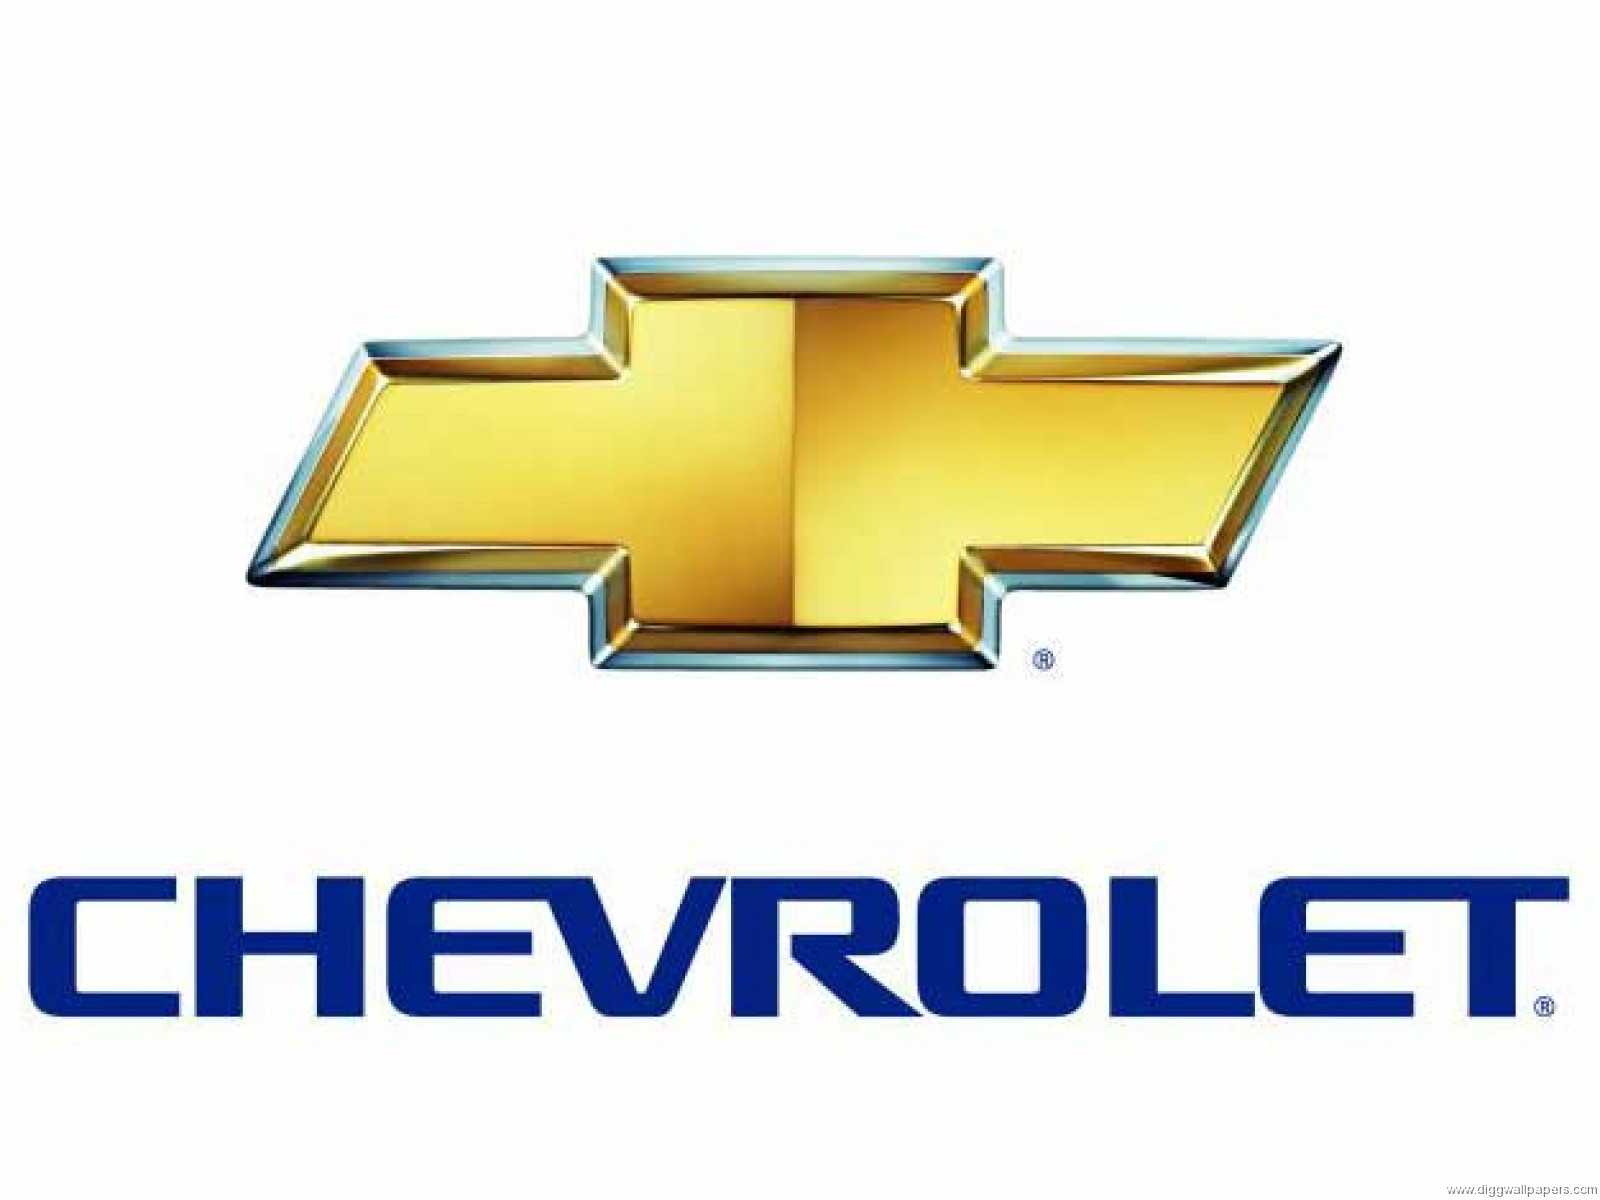 Pre-Owned Chevrolet Cars for Sale in St. Peters